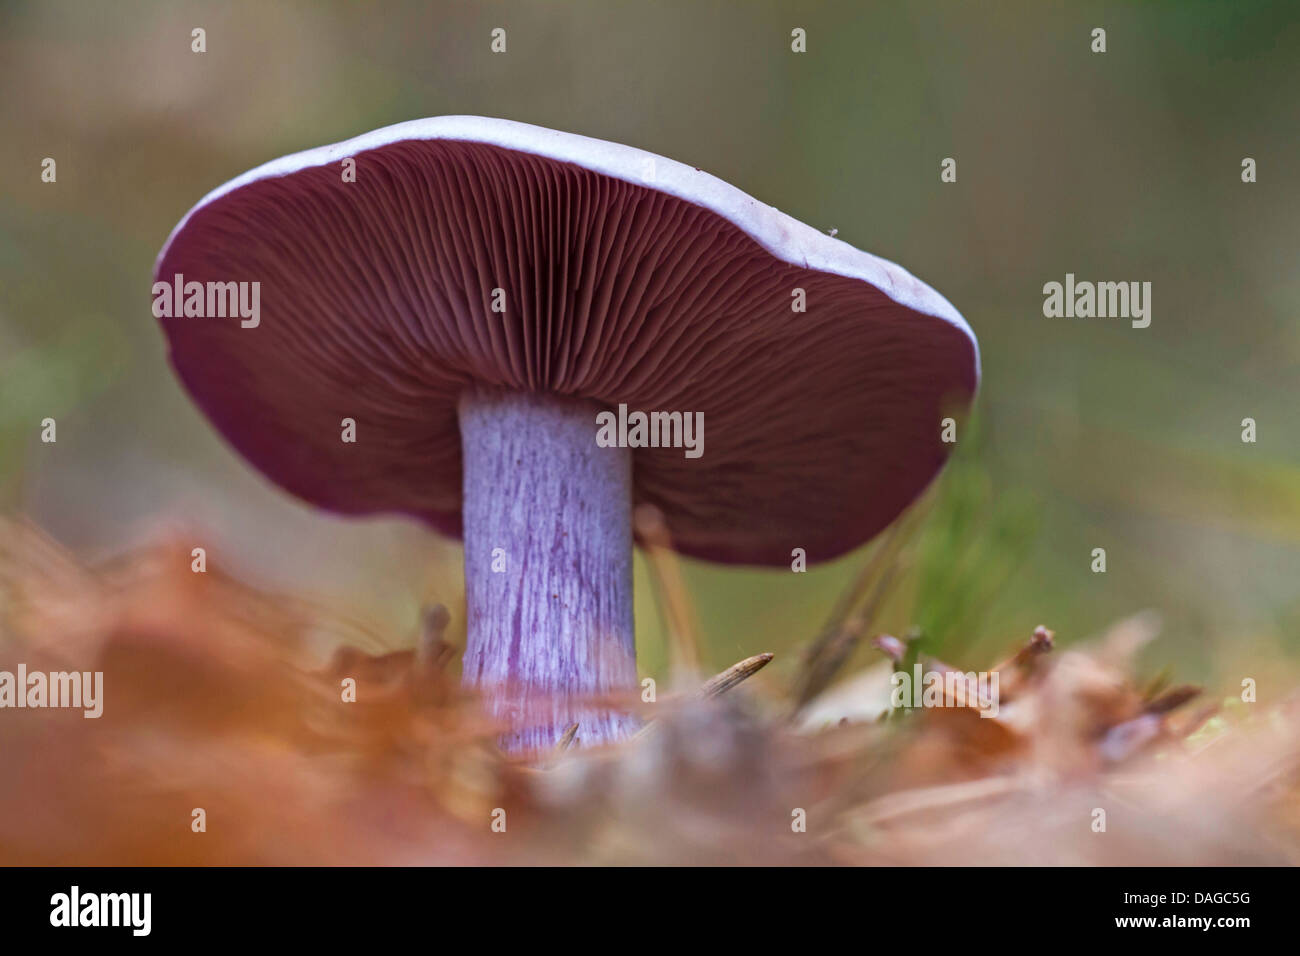 wood blewit (Lepista nuda), lateral view, Germany Stock Photo